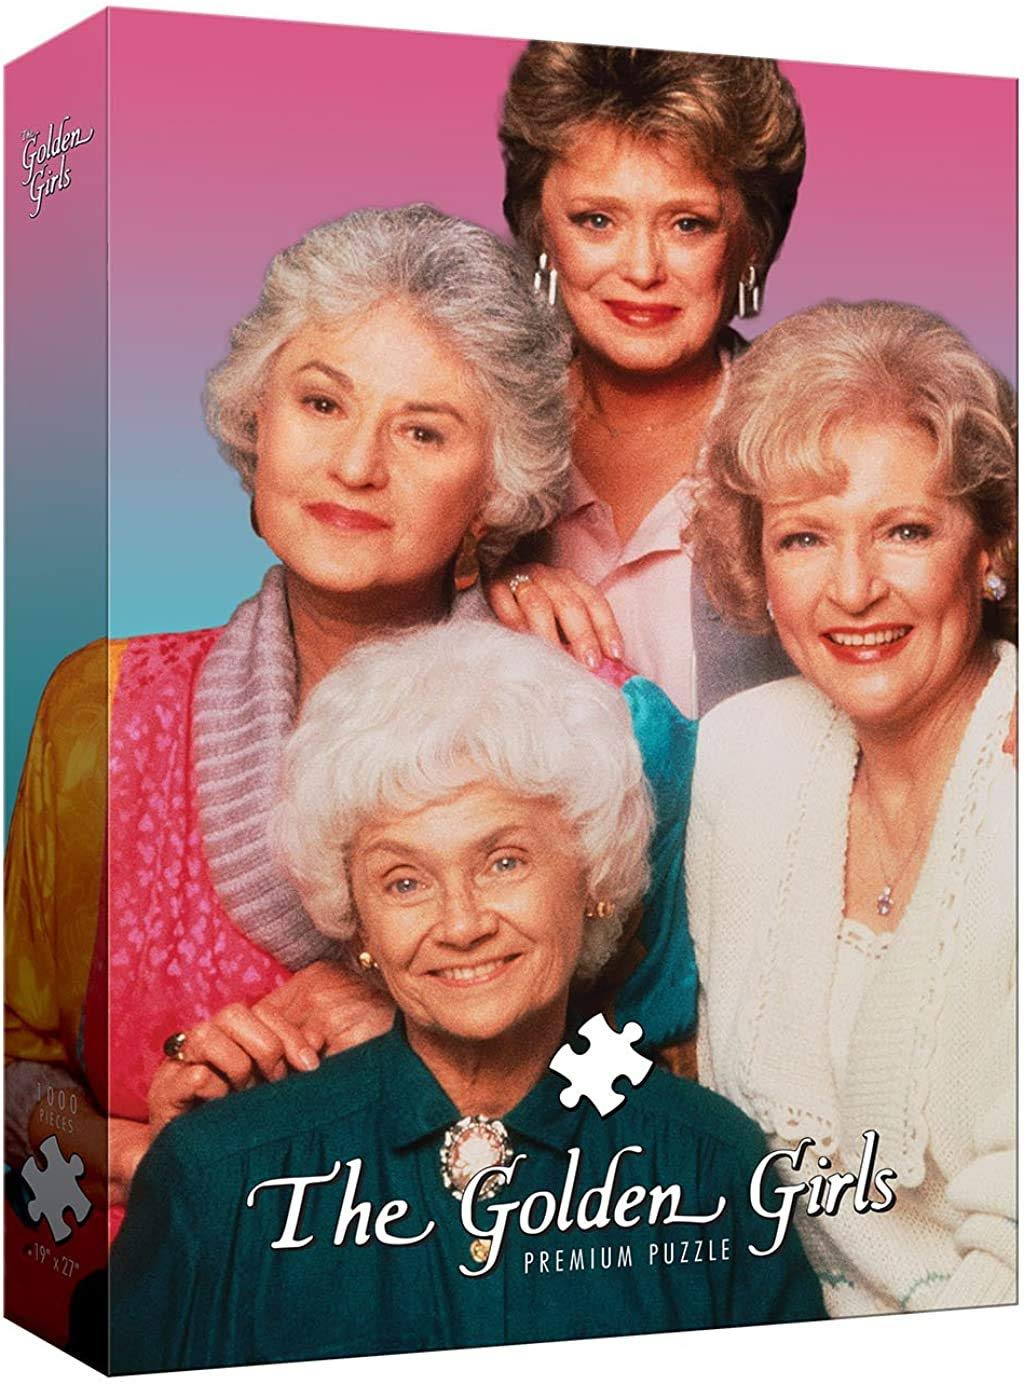 USAopoly The Golden Girls 1,000-Piece Puzzle